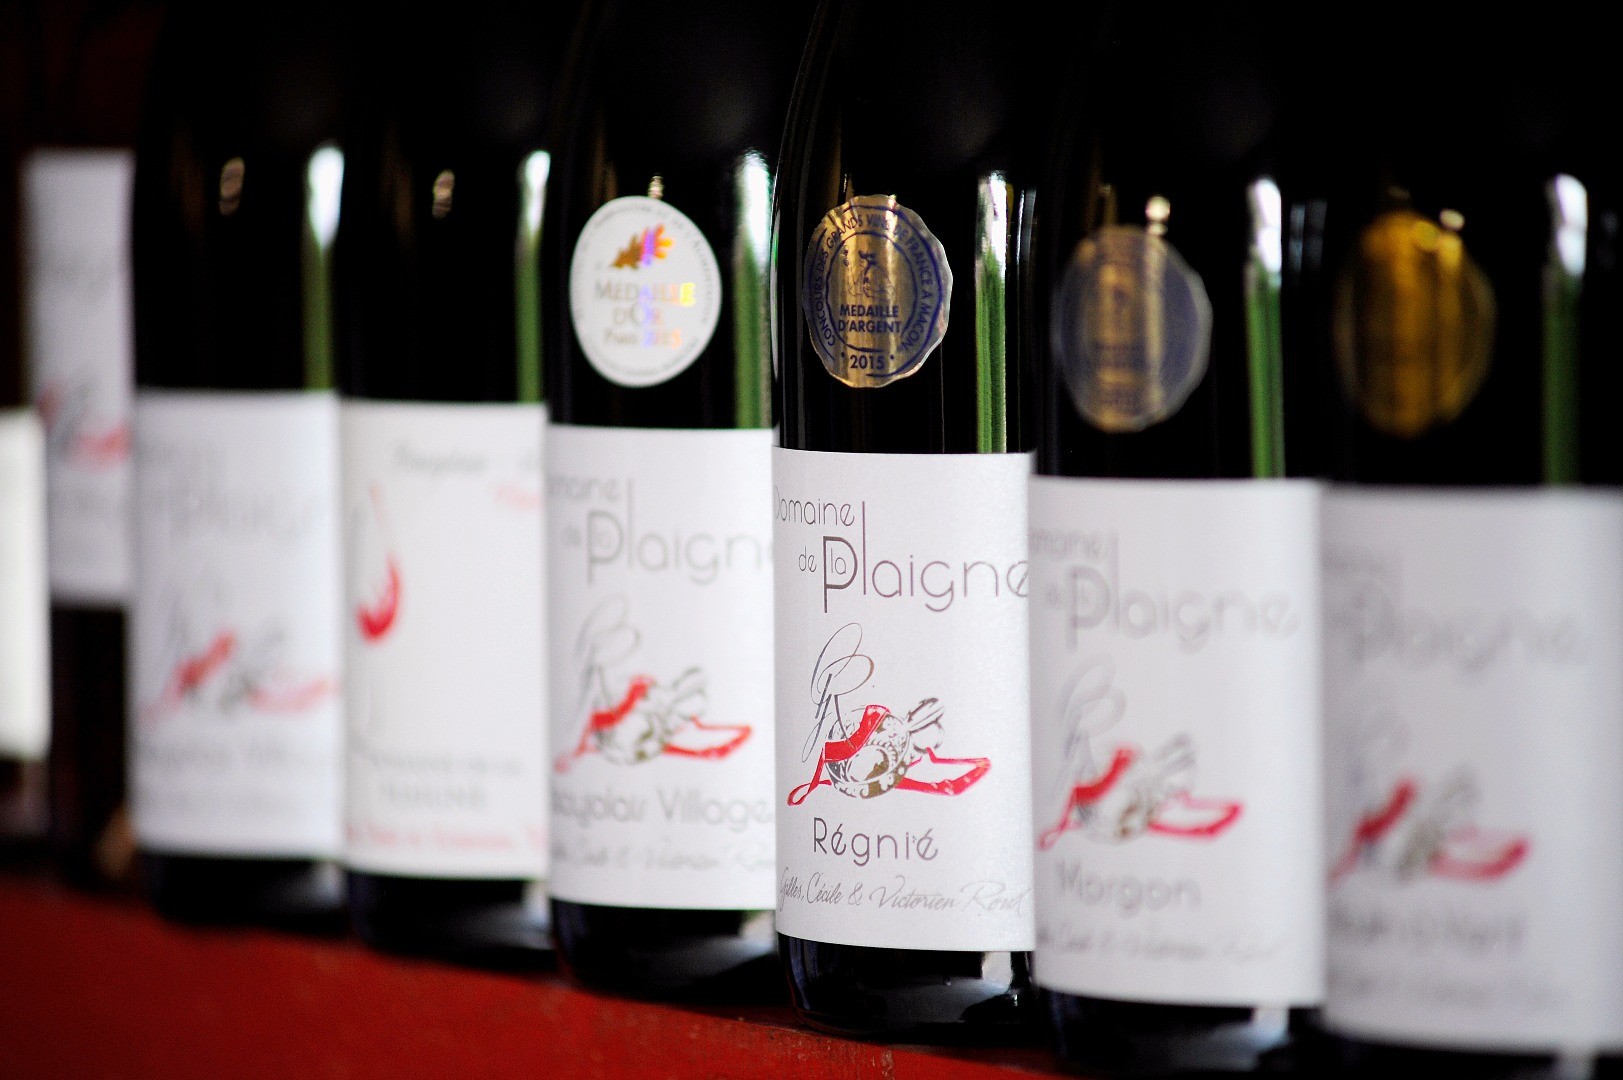 Discover our expressive, richly fruity wines